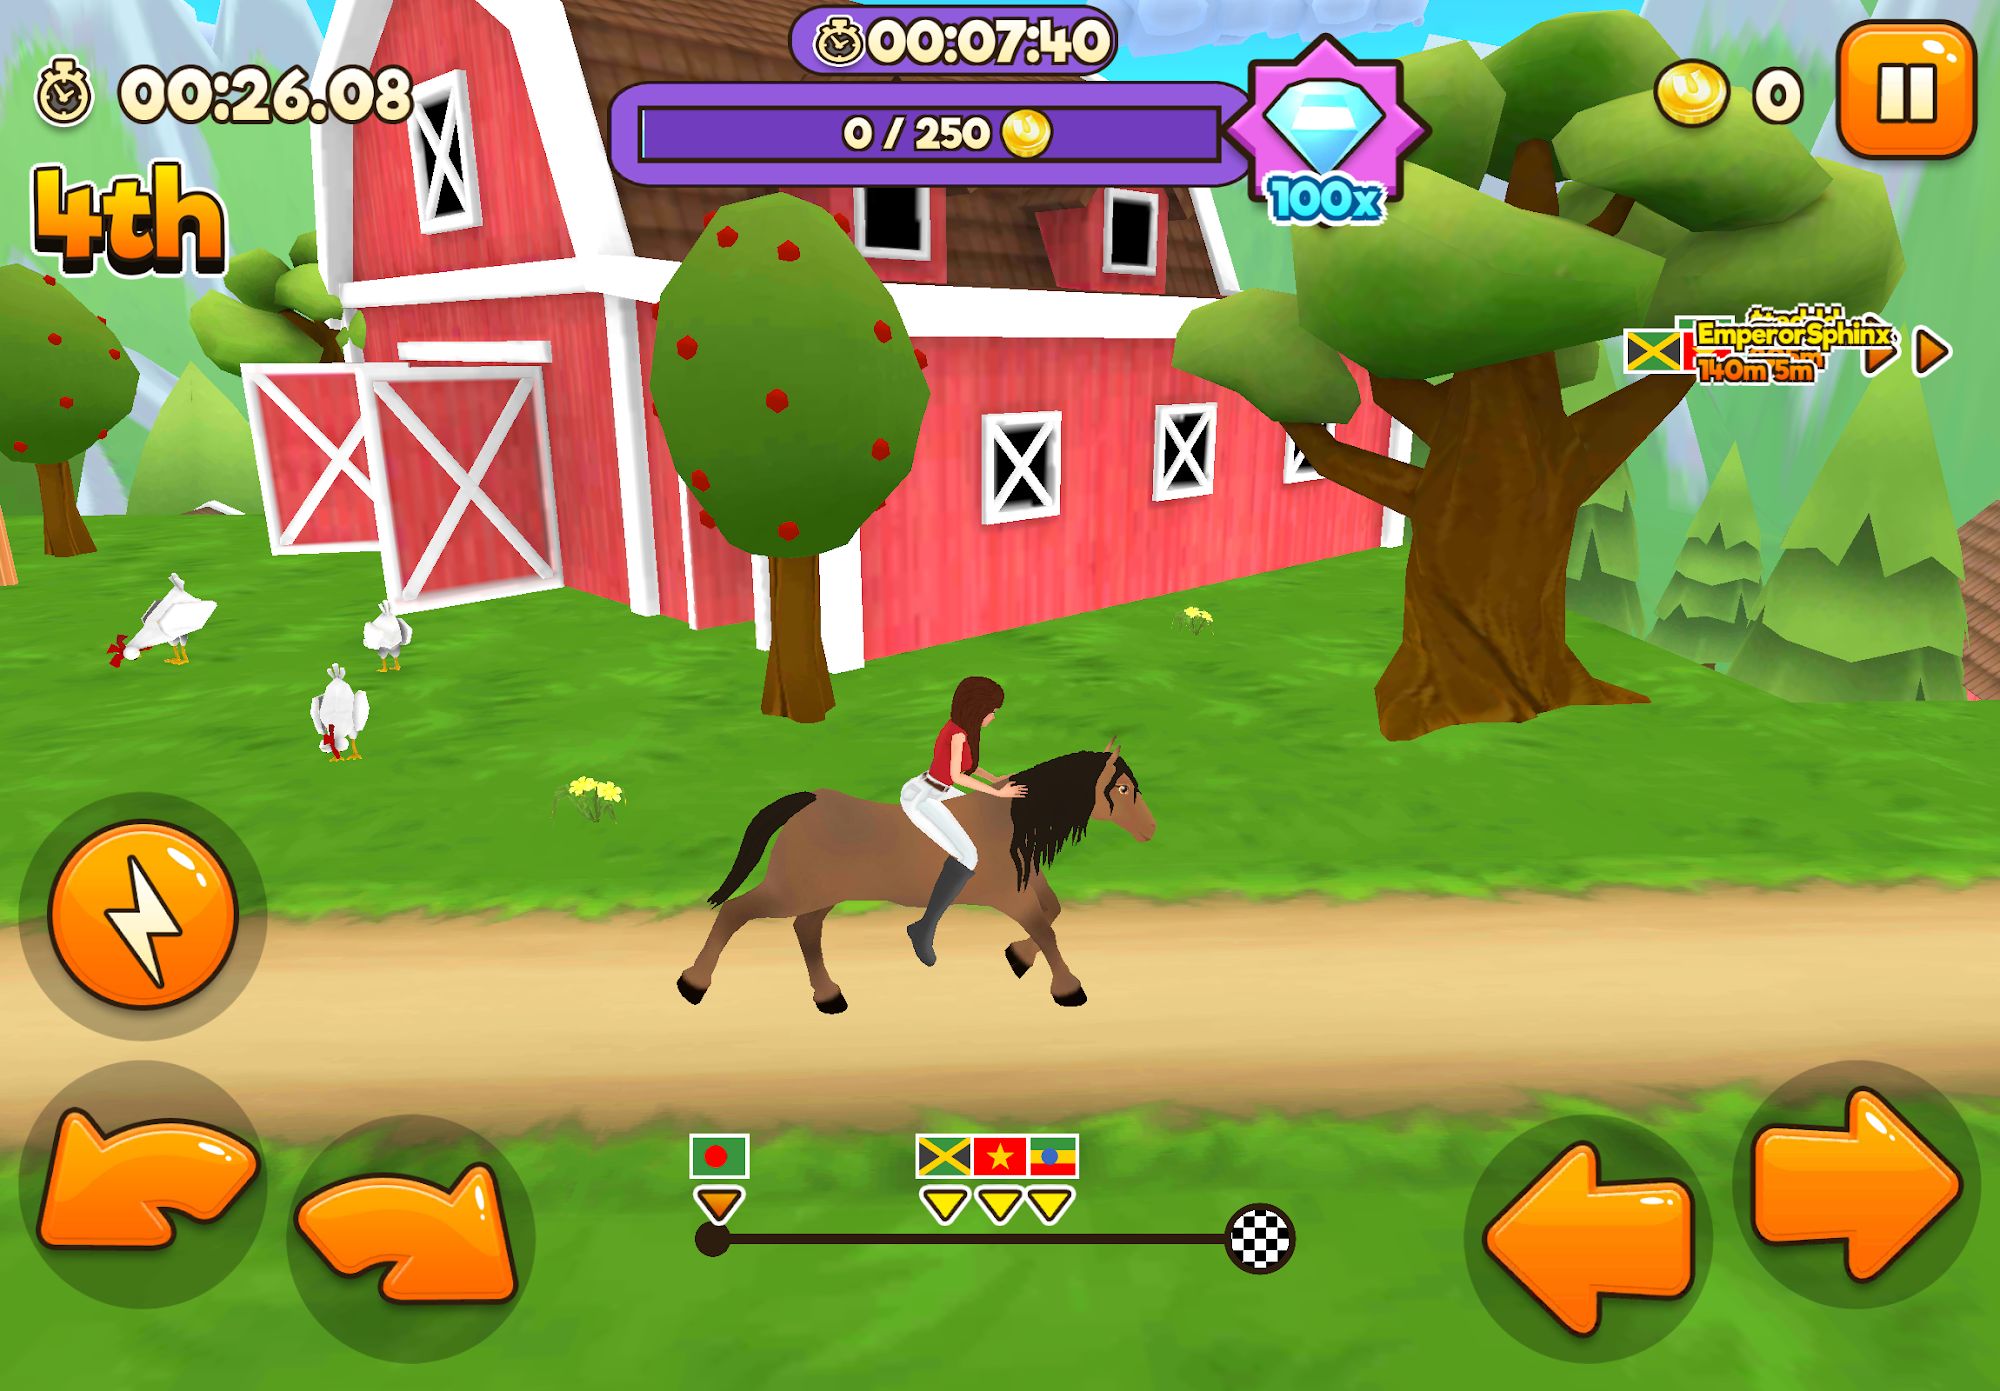 Gameplay of the Uphill Rush Horse Racing for Android phone or tablet.